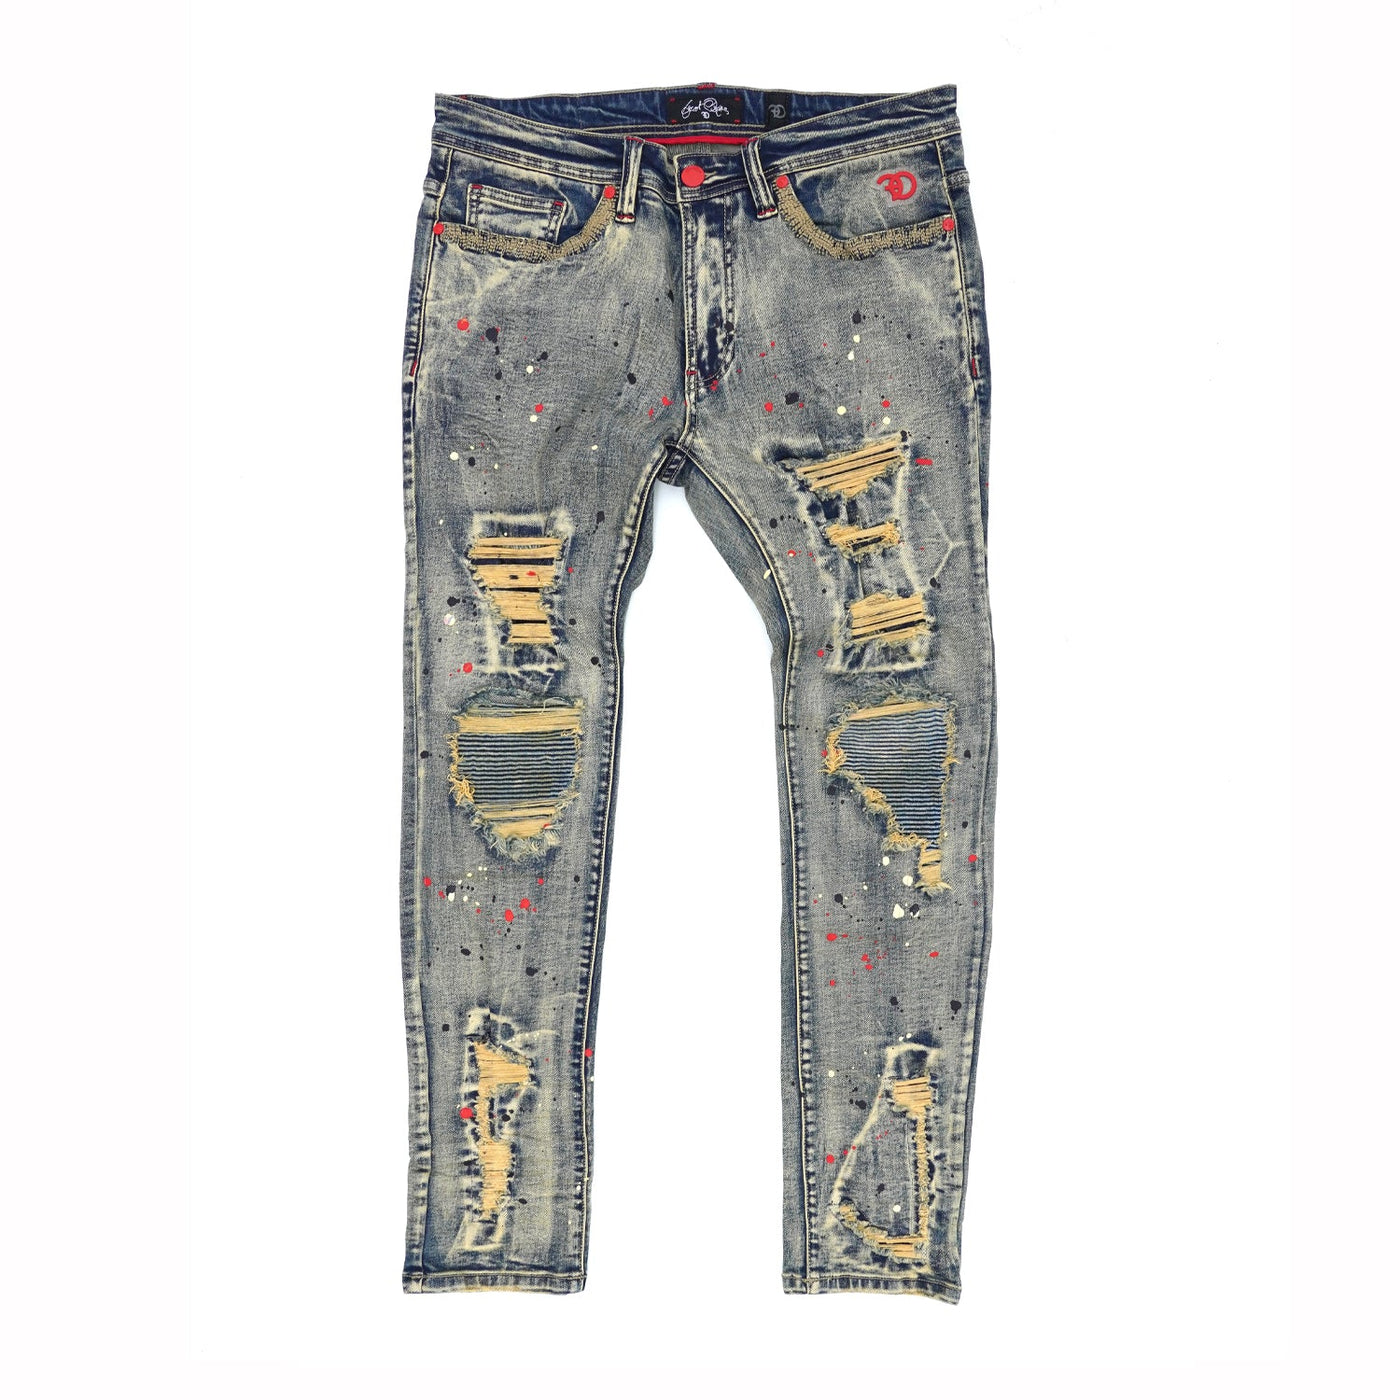 F1778 Frost Shredded Jeans w/ paint - Vintage